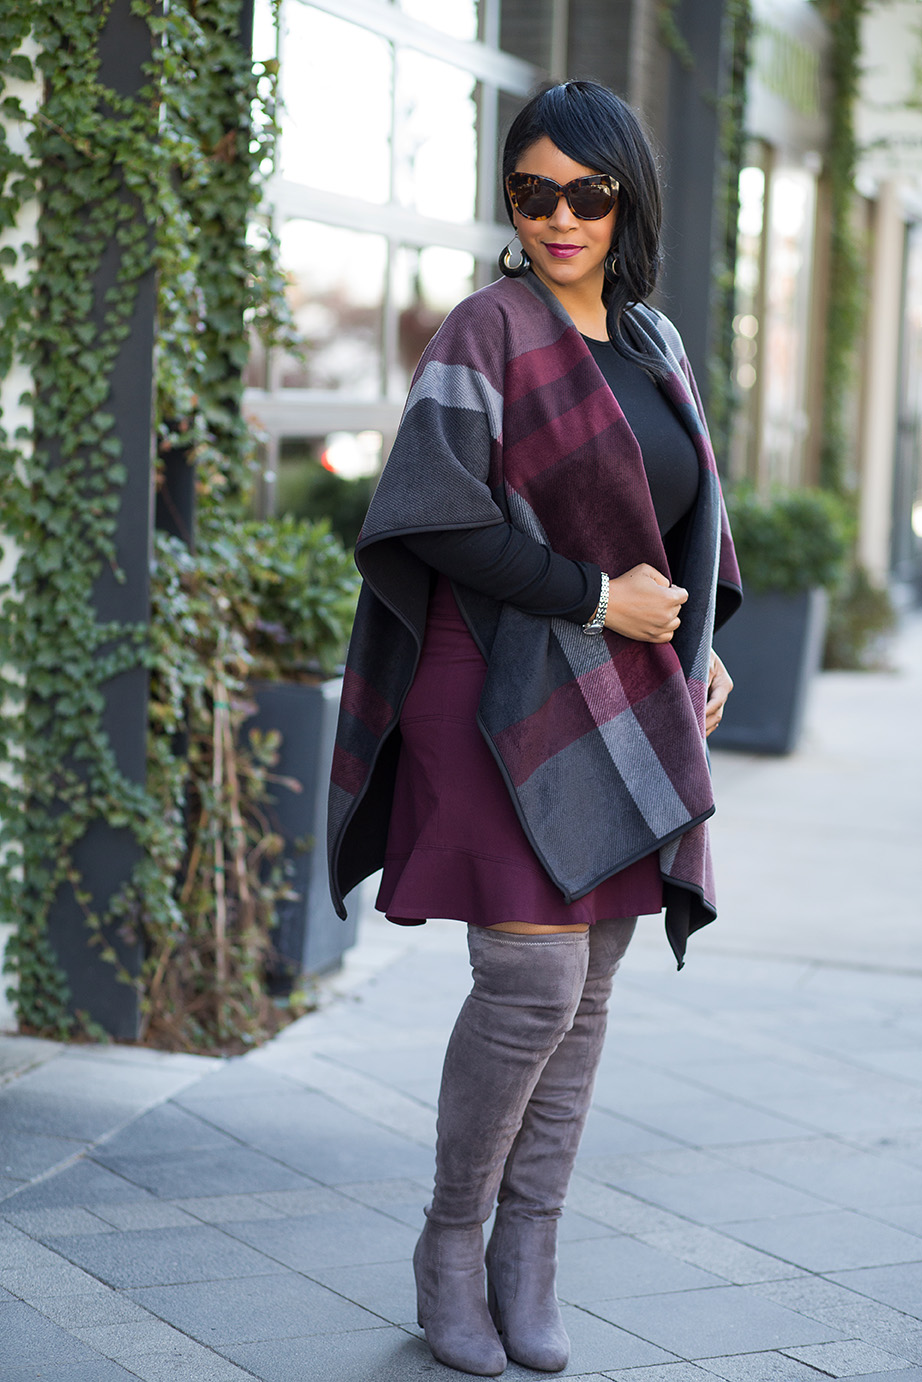 A case for Cold Weather capes: Costco wool print cape, Gap Long Sleeve Crew Tee, LOFT skirt, Grey Over the Knee Boots, House of Harlow Chelsea sunglasses, outfit of the day